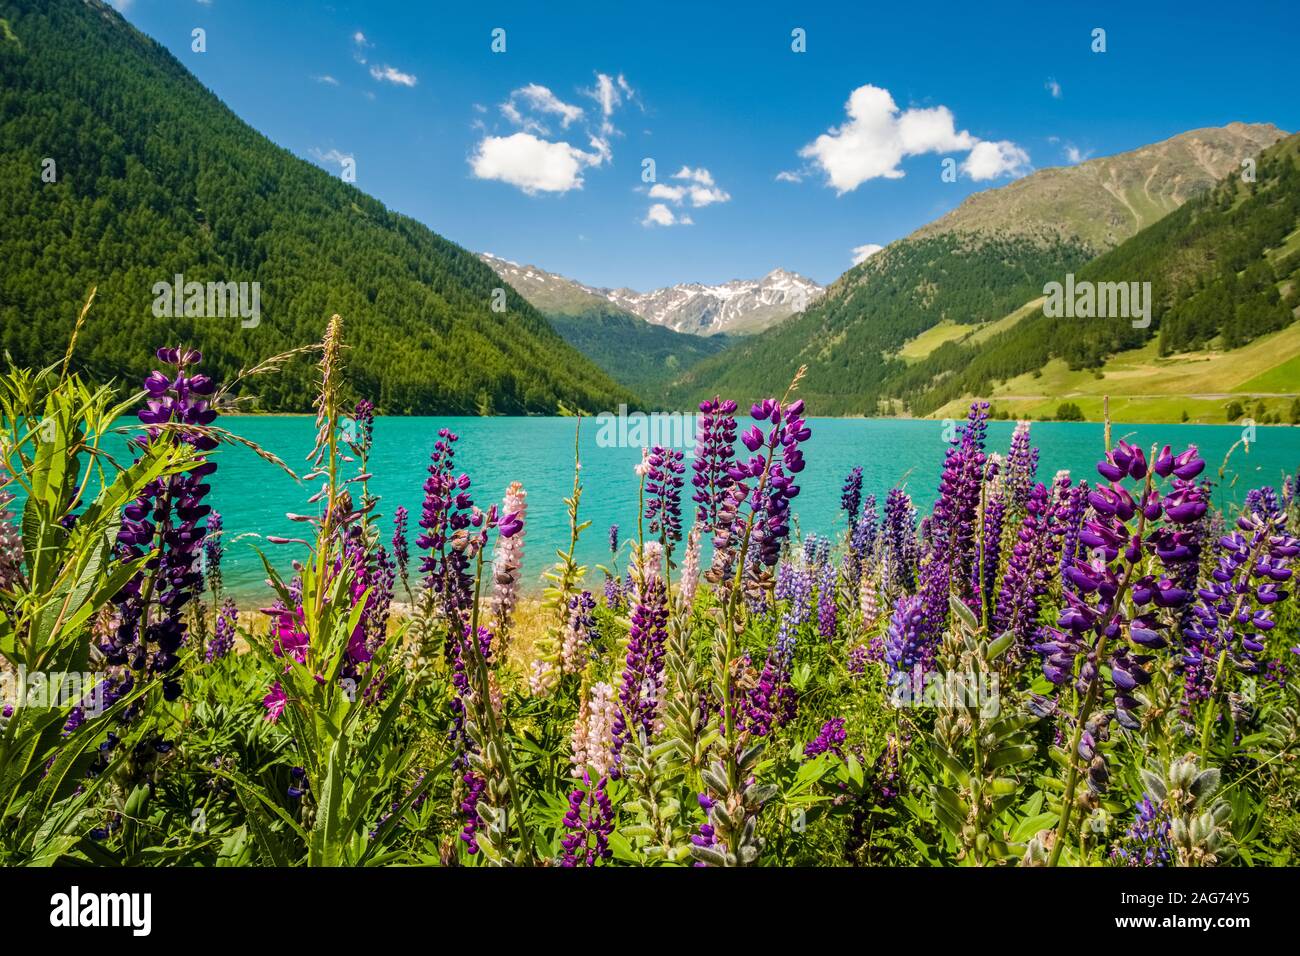 Panoramic view of the Vernagt-Stausee, a water reservoir in the high altitude valley Schnalstal, alpine flowers blooming Stock Photo